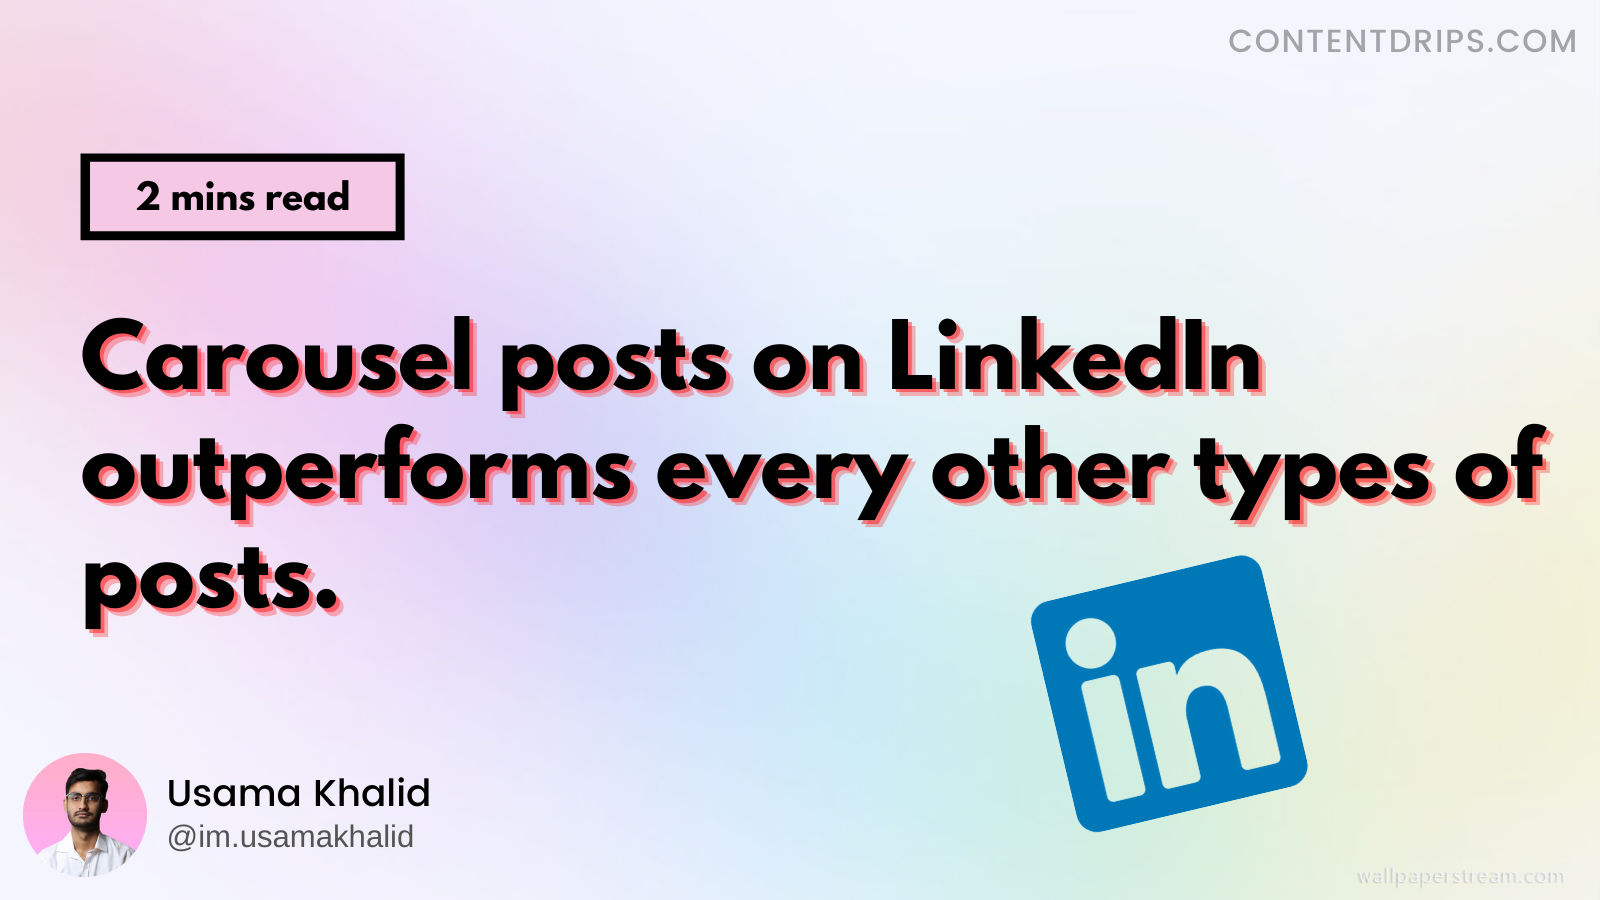 LinkedIn carousel posts performs better than